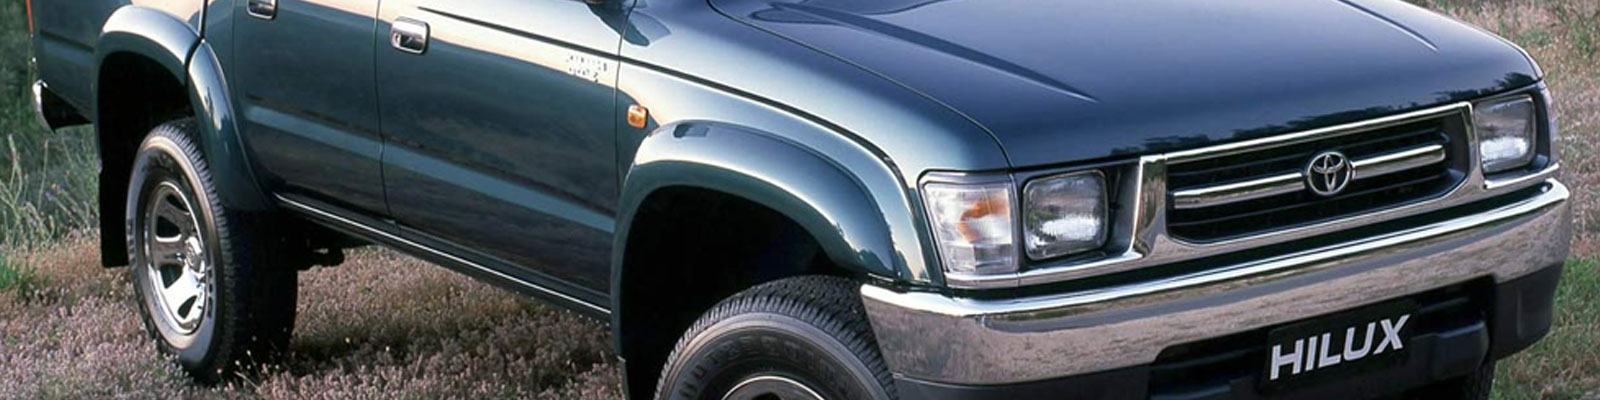 Accessories for Toyota Hilux Extra Cab 1998-2002